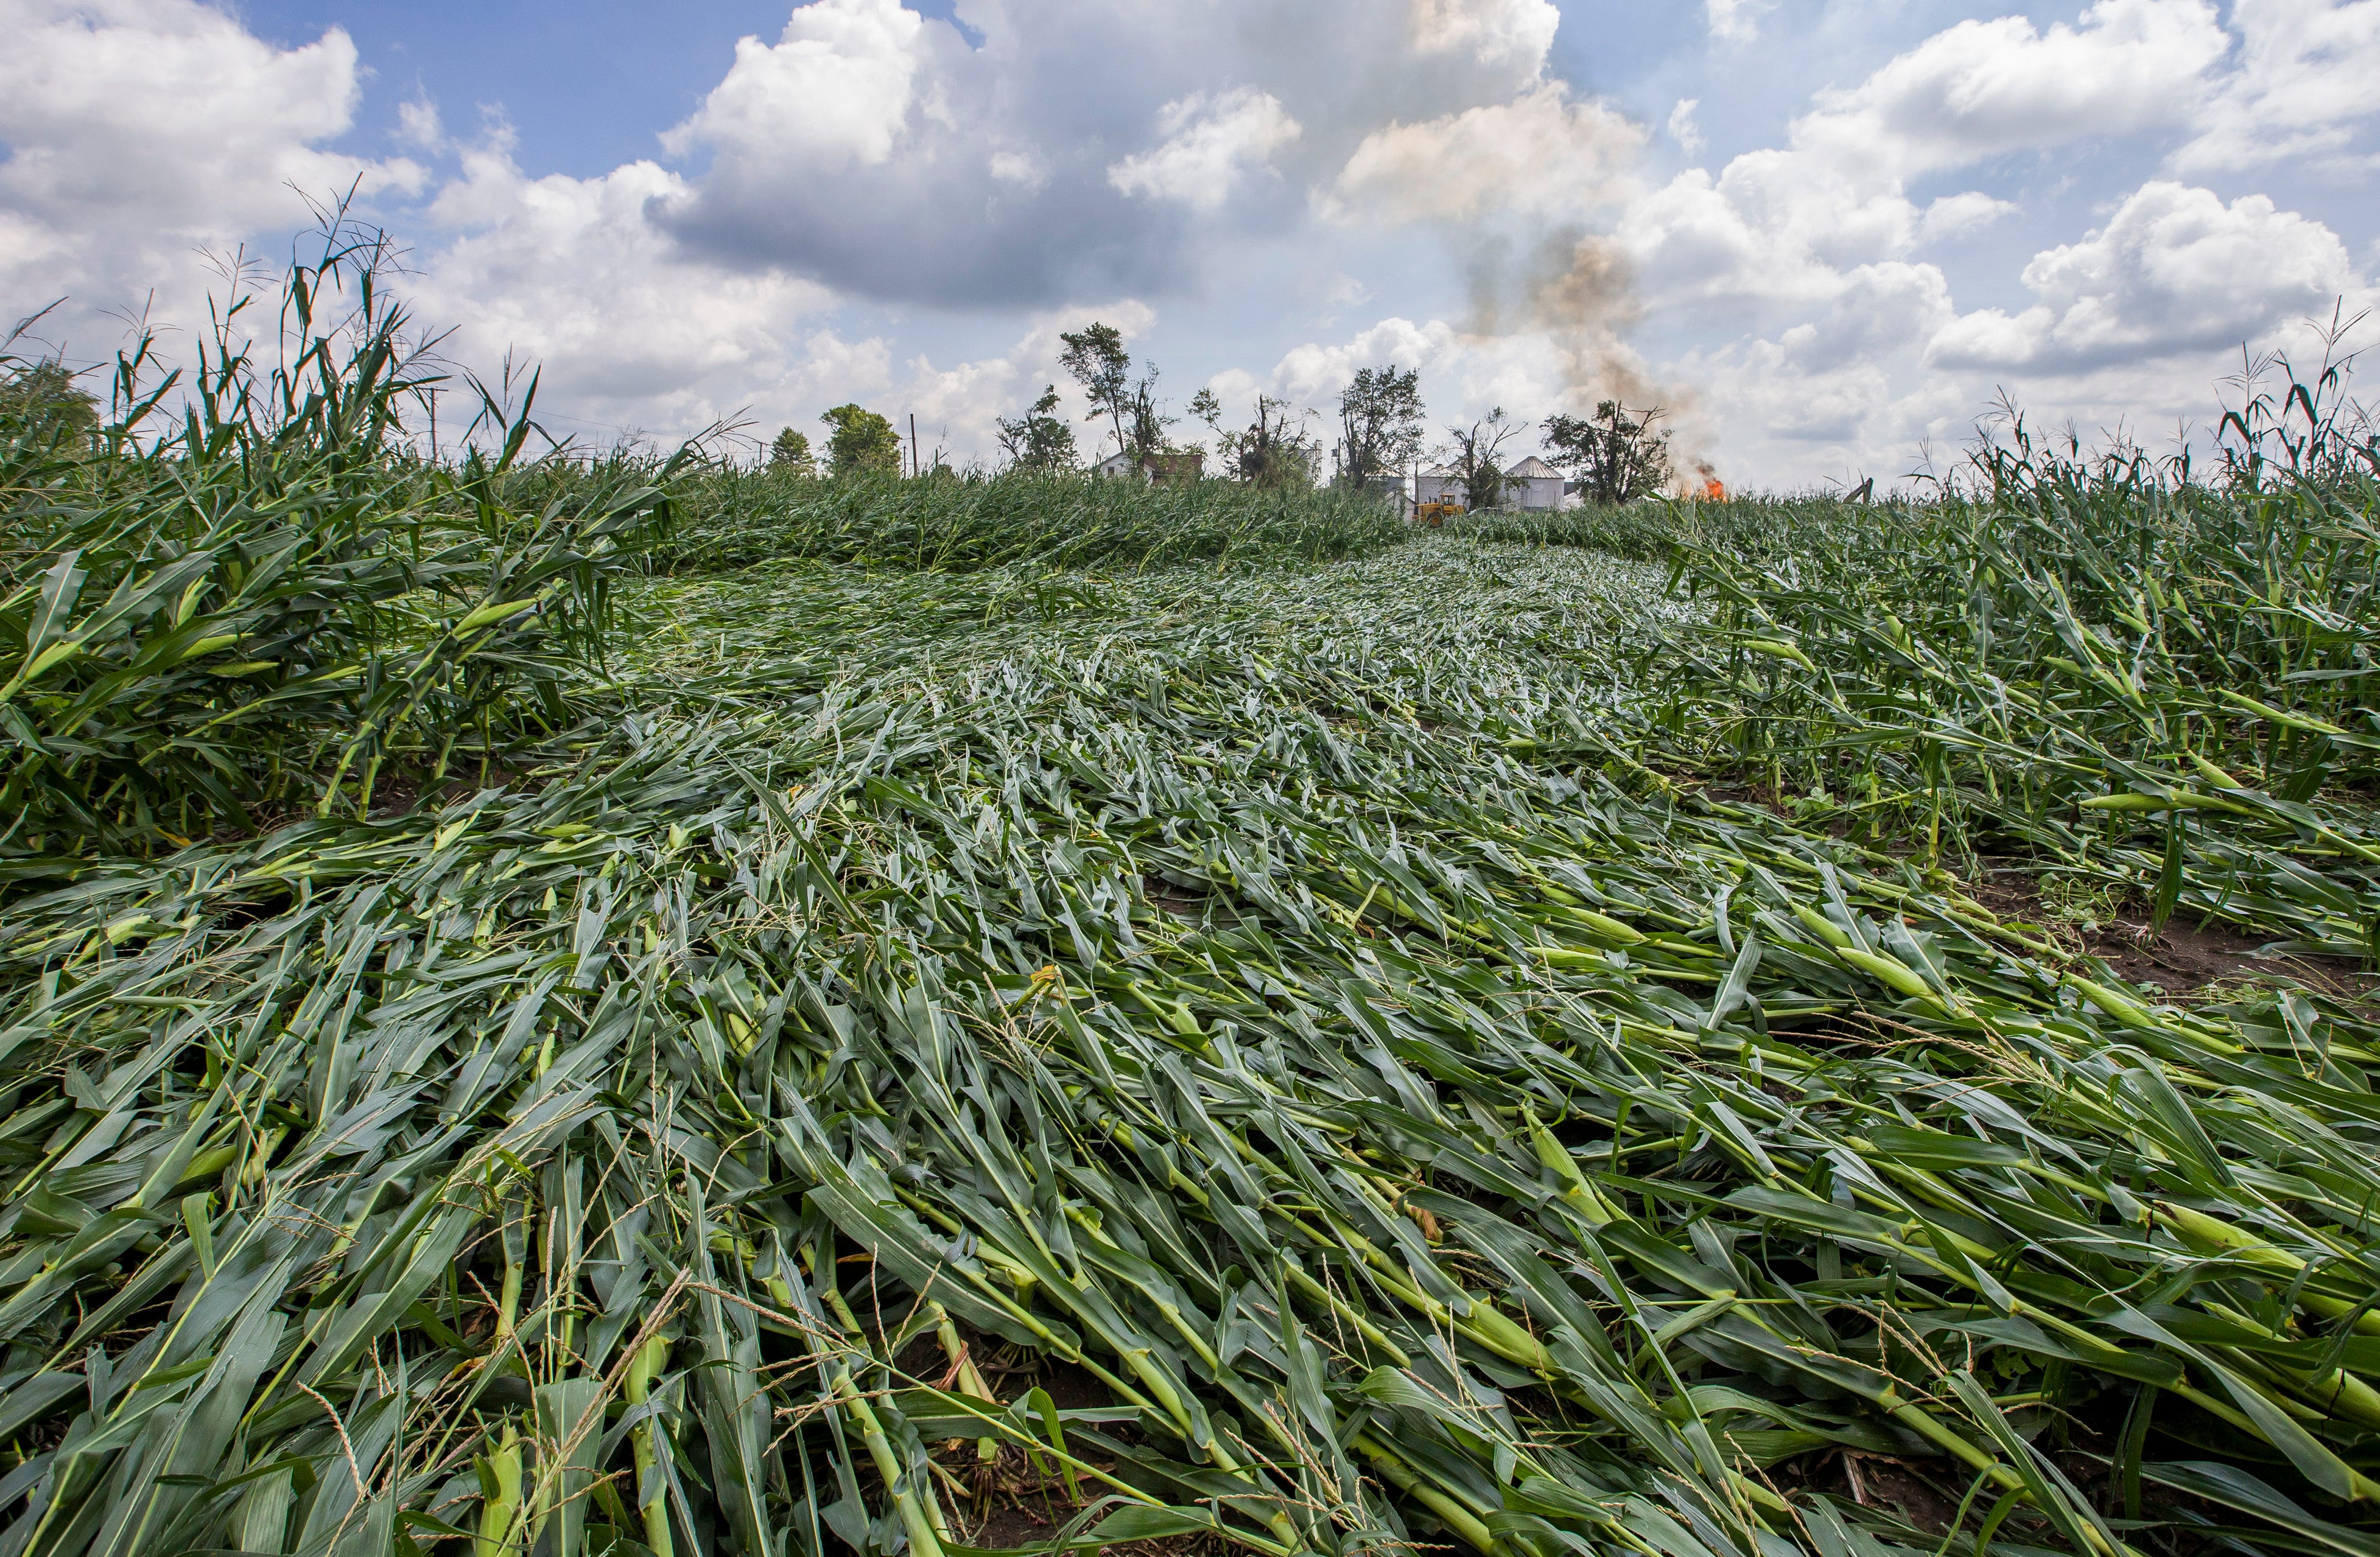 The path of a possible tornado is evident in a cornfield after a powerful storm on Tuesday, Aug. 11, 2020, in Wakarusa, Ind.